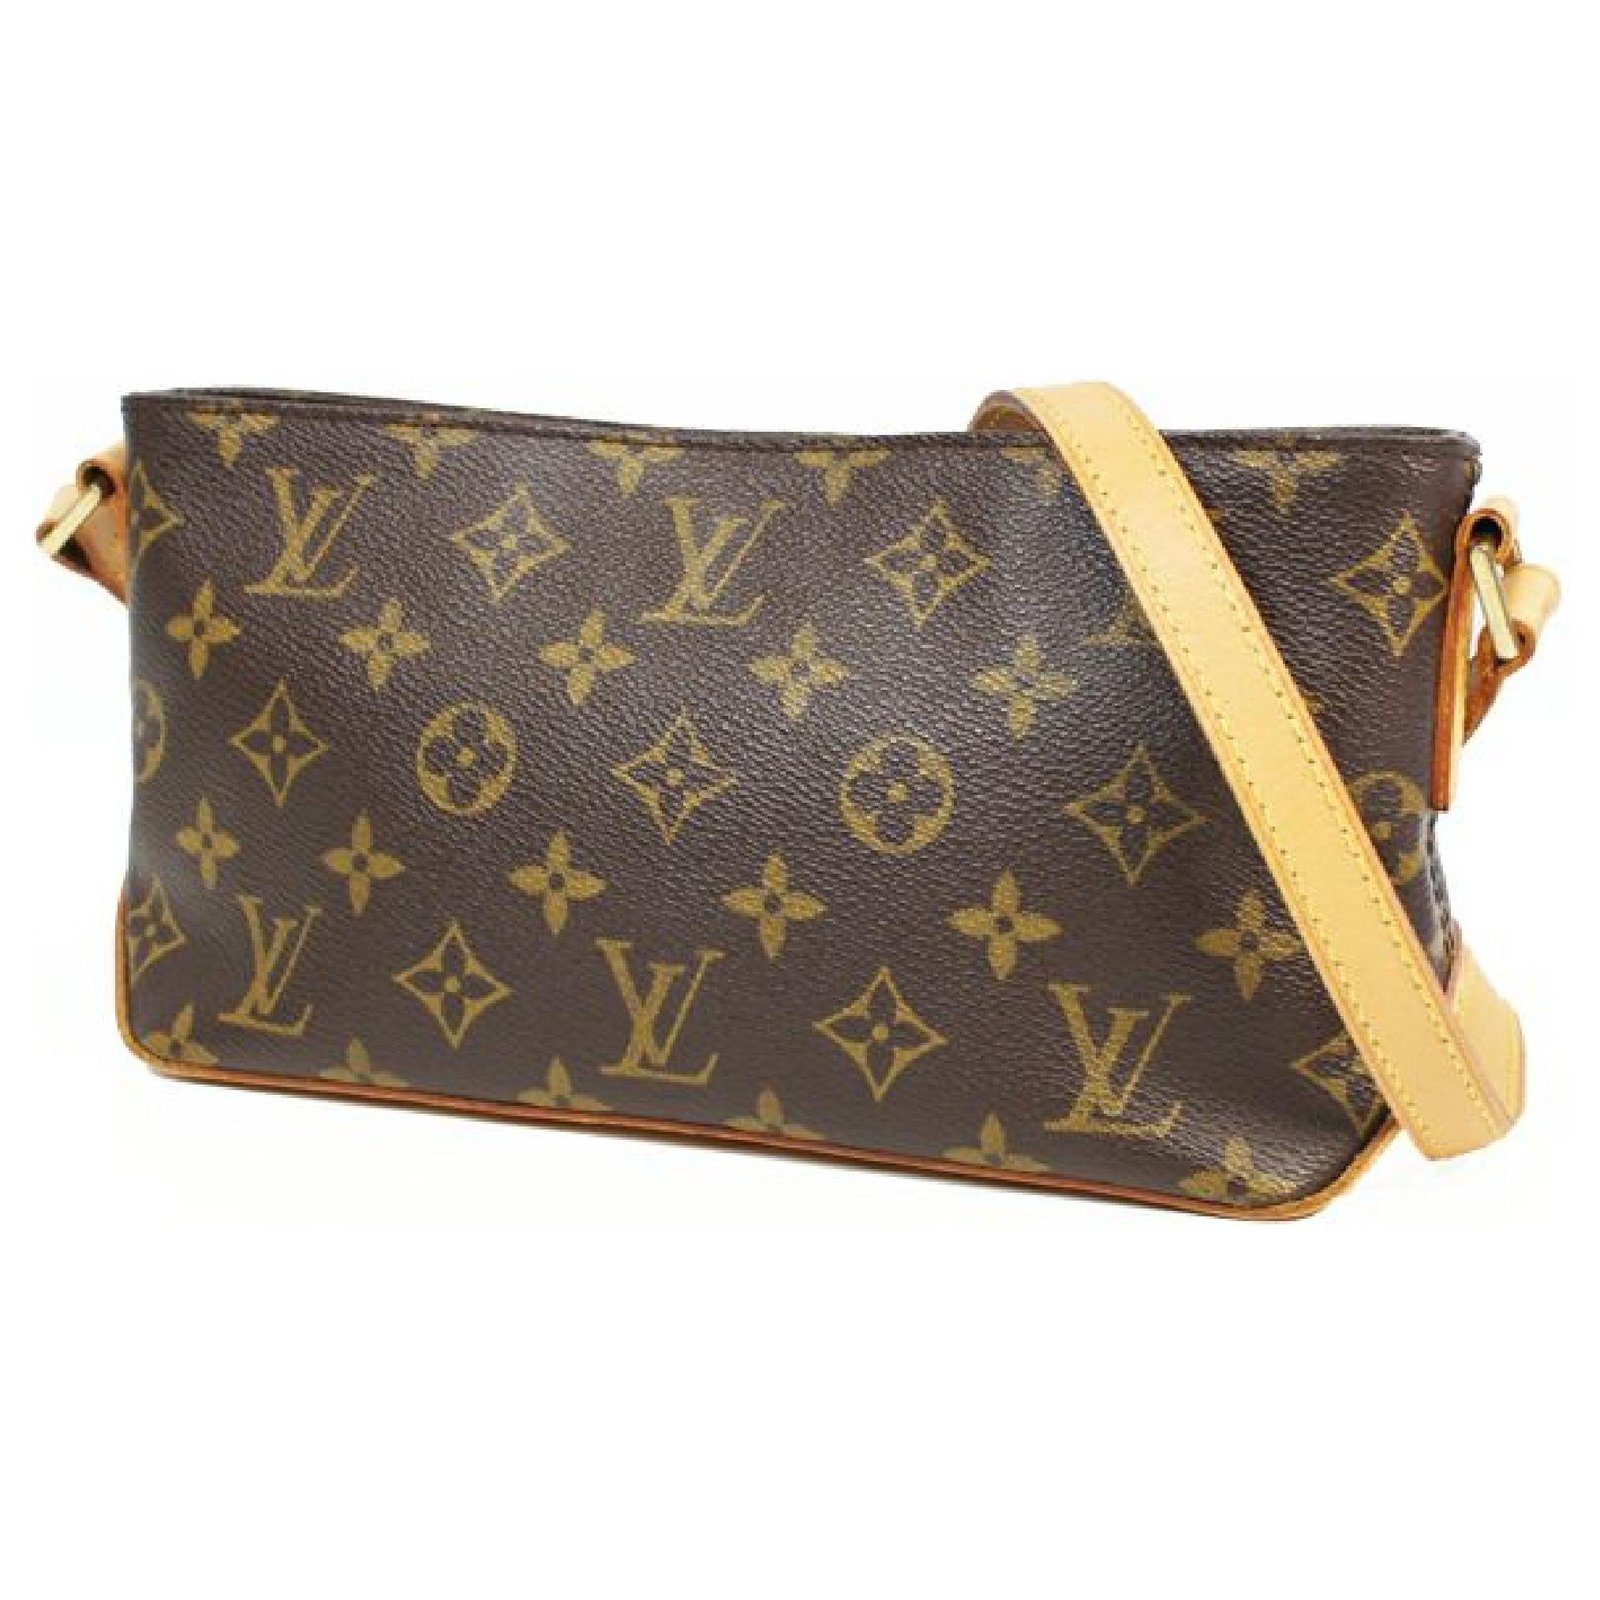 Authentic Louis Vuitton Trotter Crossbody Bag with adjustable strap length